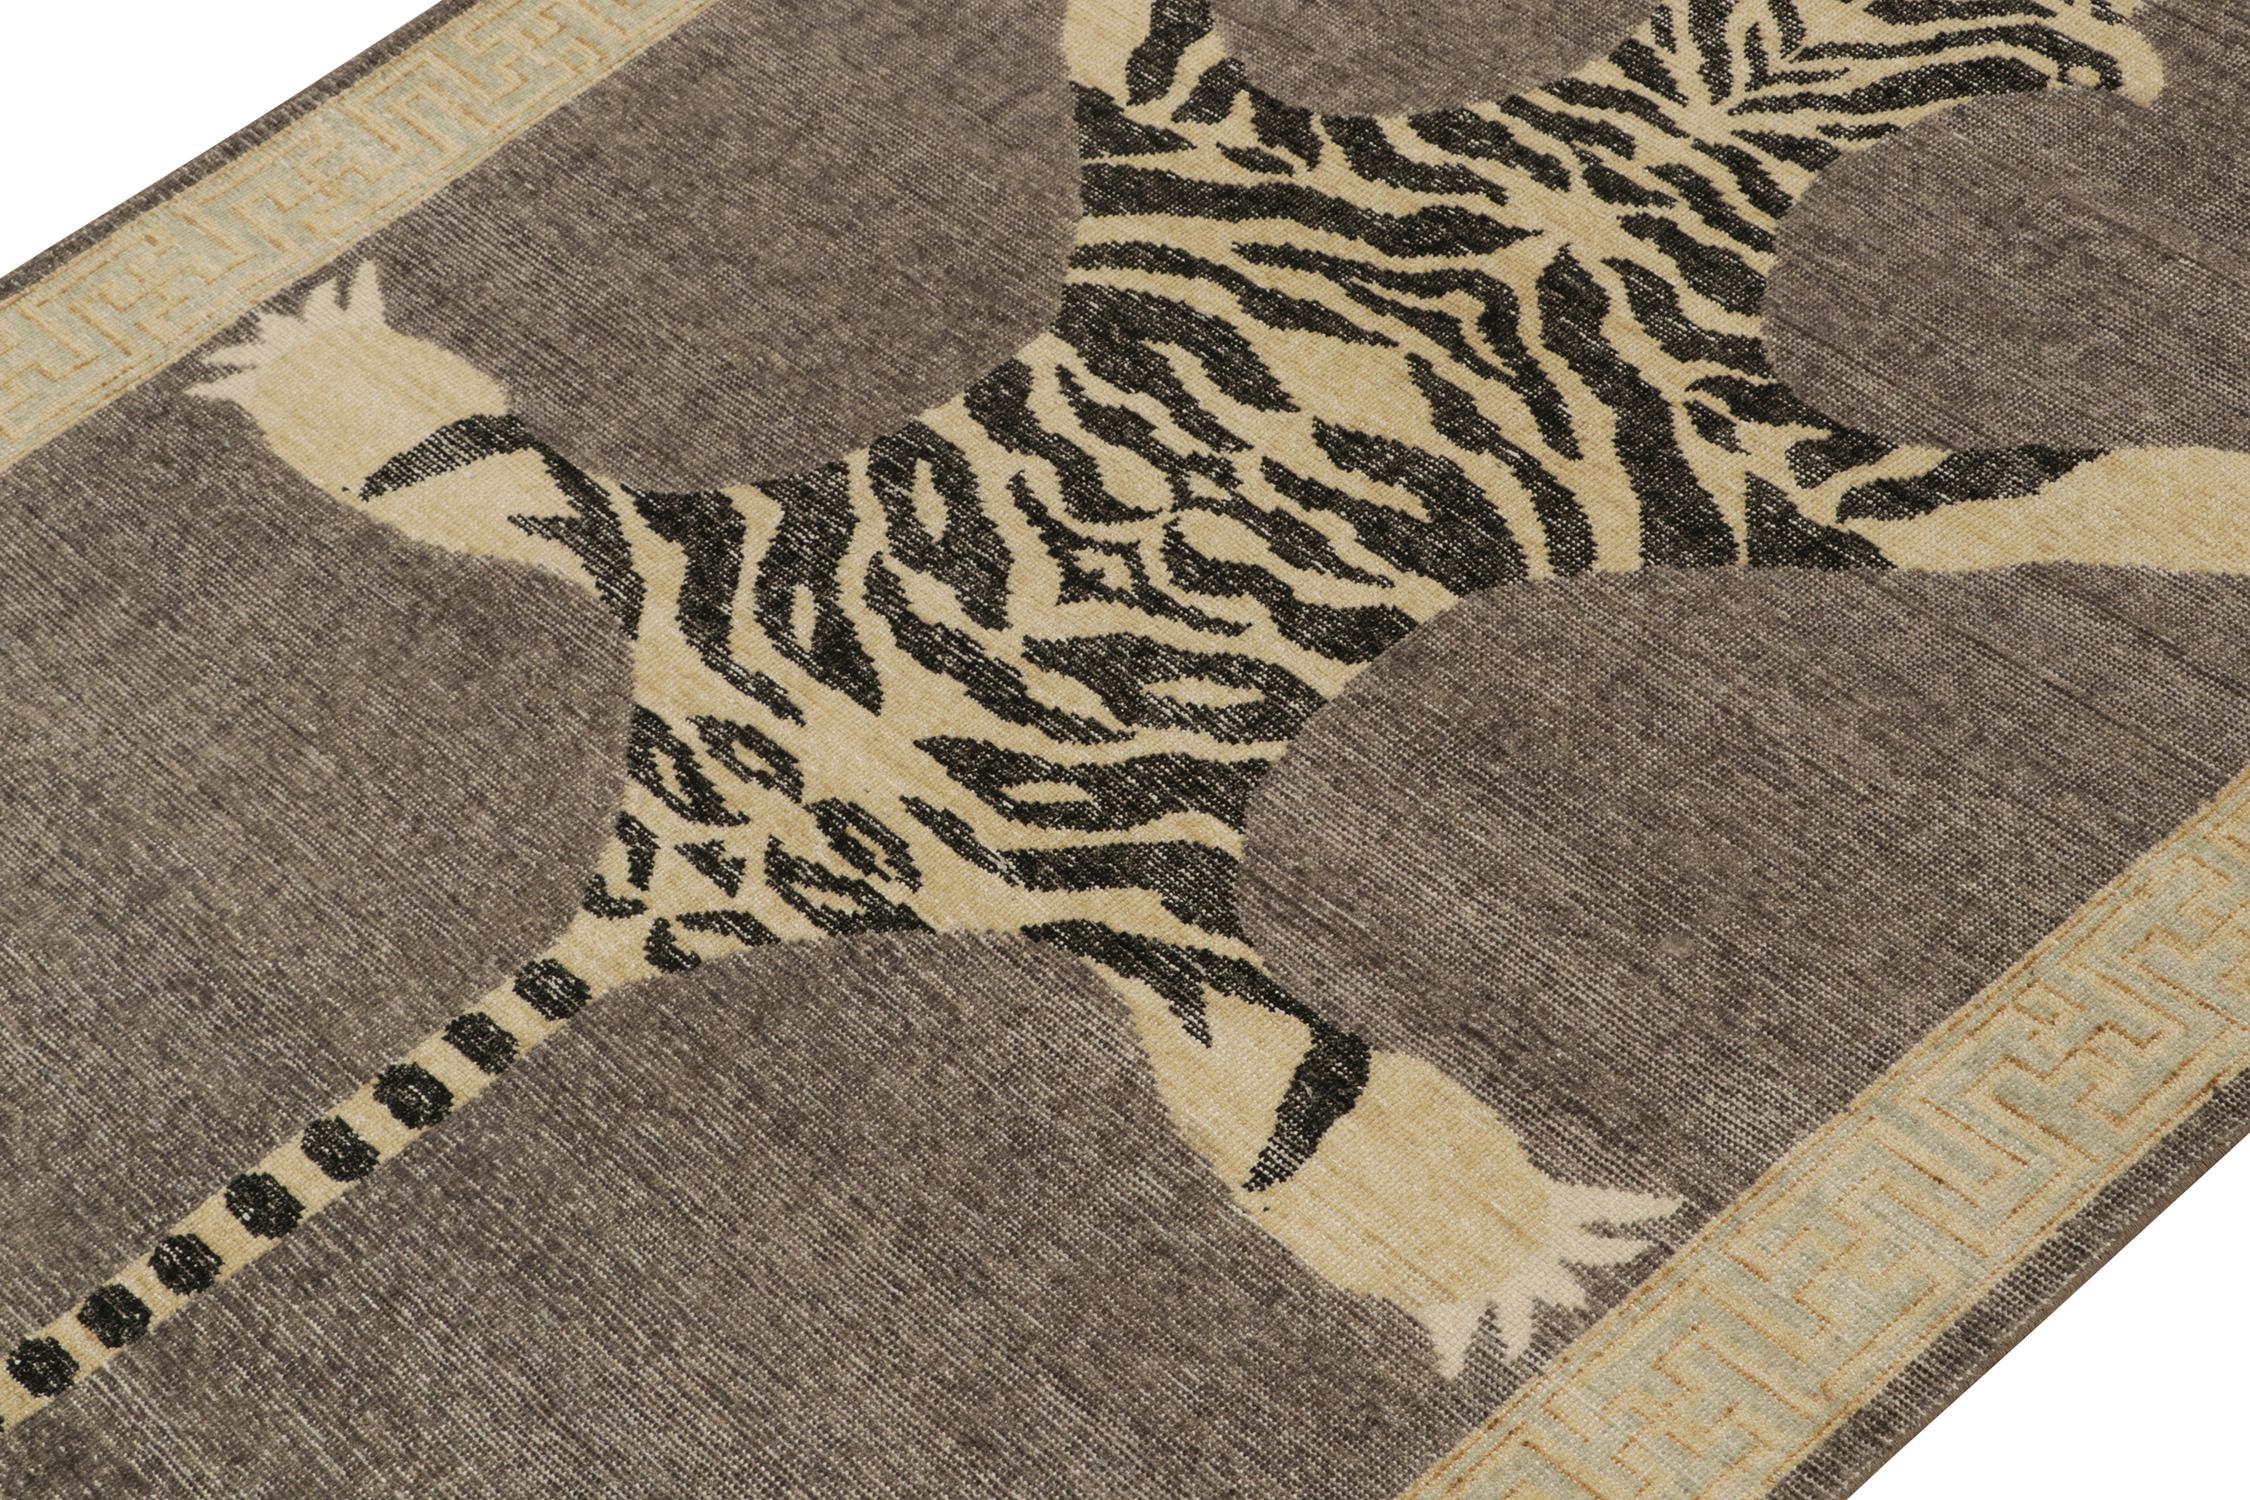 Indian Rug & Kilim’s Distressed Style Tiger Skin Rug in Gray, Beige and Black Pictorial For Sale